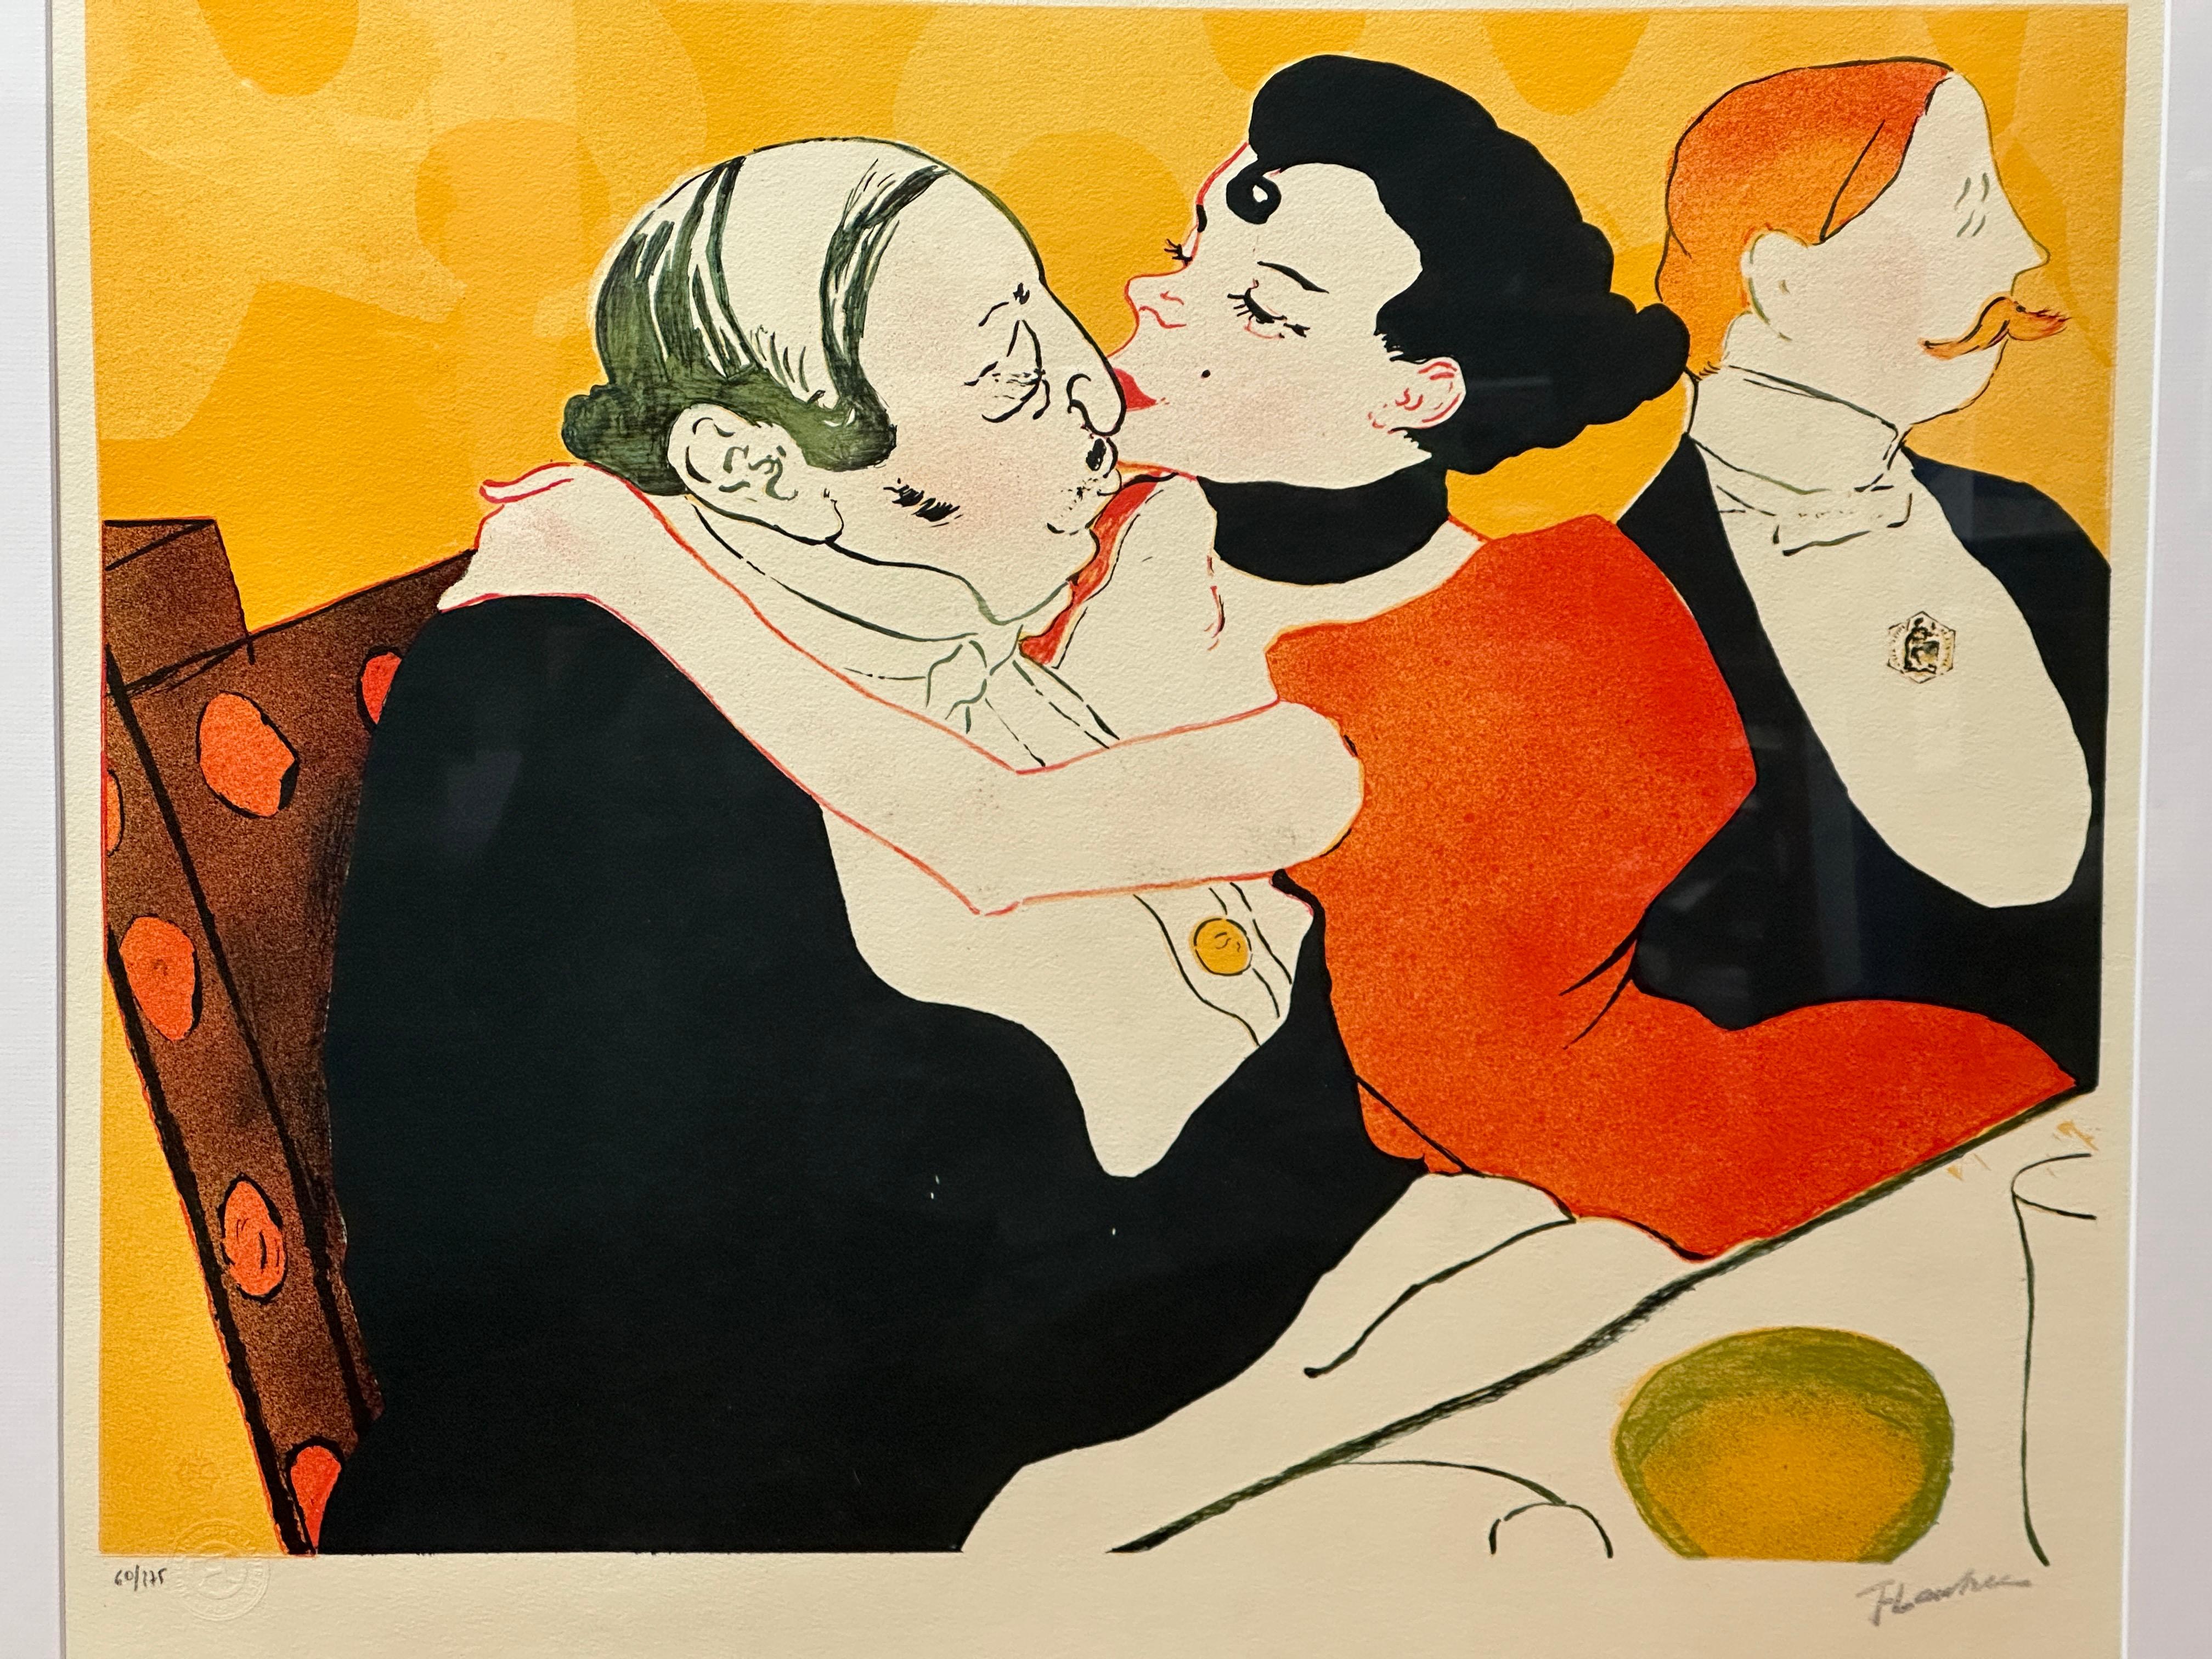 This signed lithograph, numbered 60/275, originates from an 1892 poster and bears the seal of the Musée d’Albi. This well-known lithograph by Toulouse-Lautrec represents the upper half of a poster that advertised Victor Joze’s novel titled “Reine de